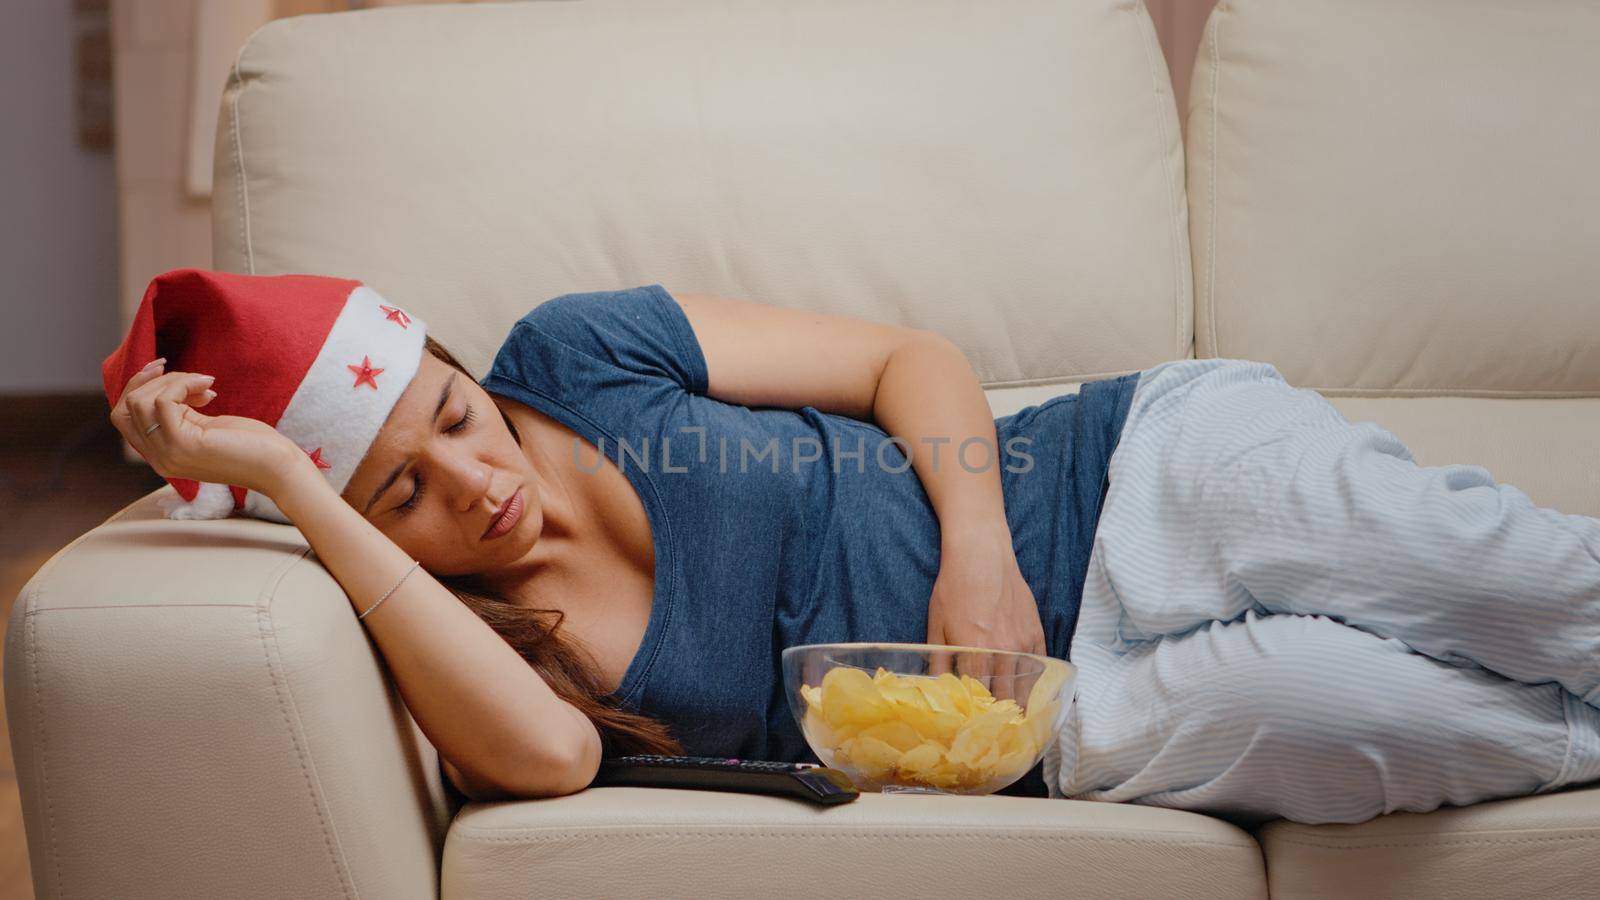 Close up of woman falling asleep while watching television on couch. Festive person wearing santa hat and feeling sleepy on christmas eve. Adult sleeping on sofa with bowl of chips